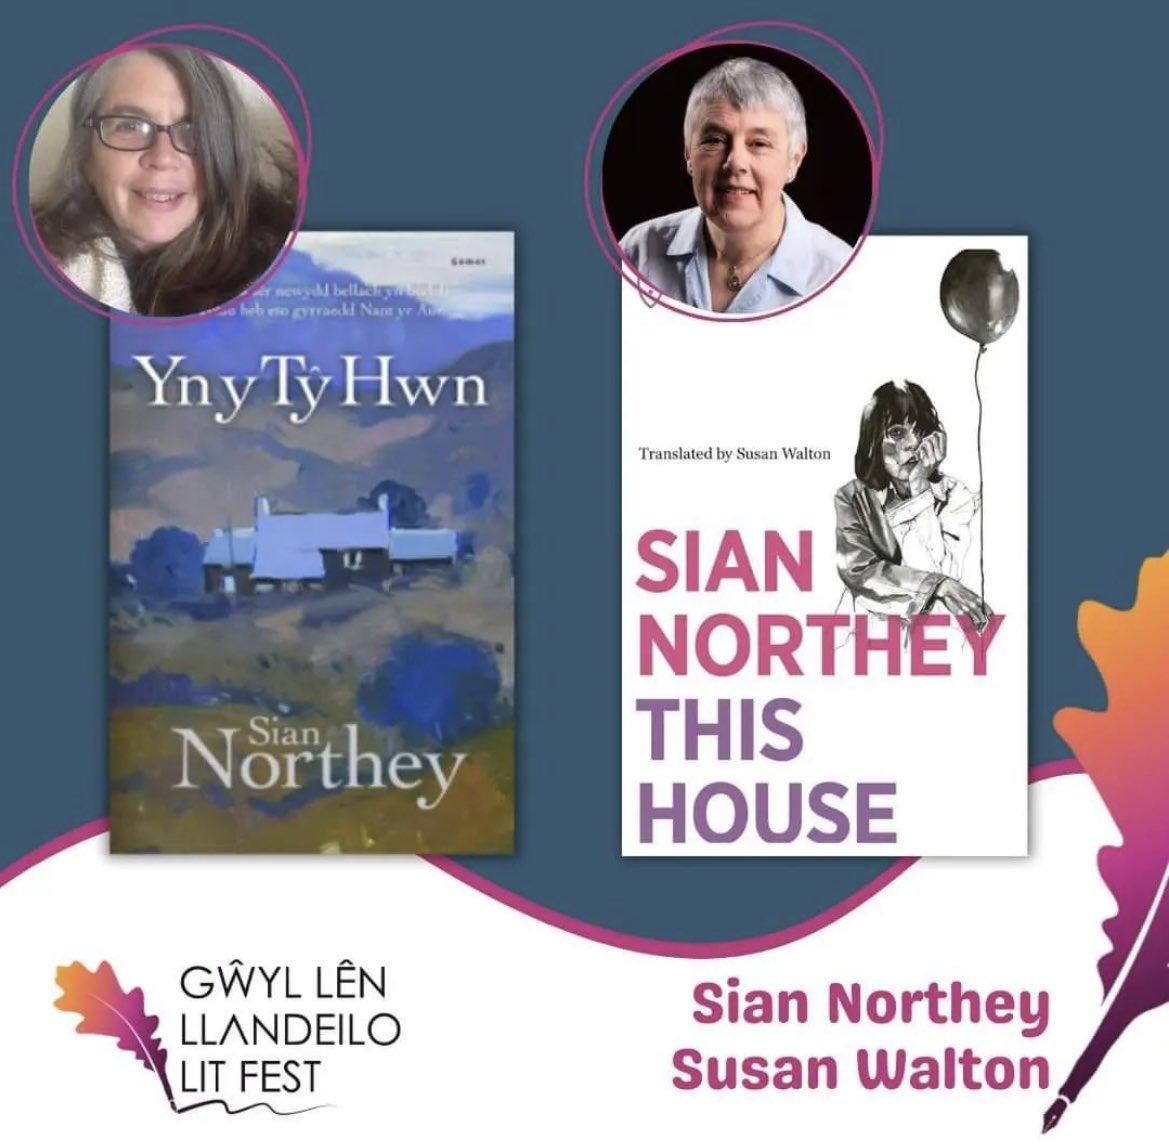 📢 ATTENTION R3BELS! Sian Northey & Susan Walton discuss their experience of translating and being translated at LLANDEILO LIT FEST 🎙️Session in Welsh 🏴󠁧󠁢󠁷󠁬󠁳󠁿with simultaneous translation 🗓️ Dydd Sul 28 Ebrill / Sunday 28 April, 3pm @ Hengwrt 🎟️ Tickets here llandeilolitfest.org/programme/yn-y…